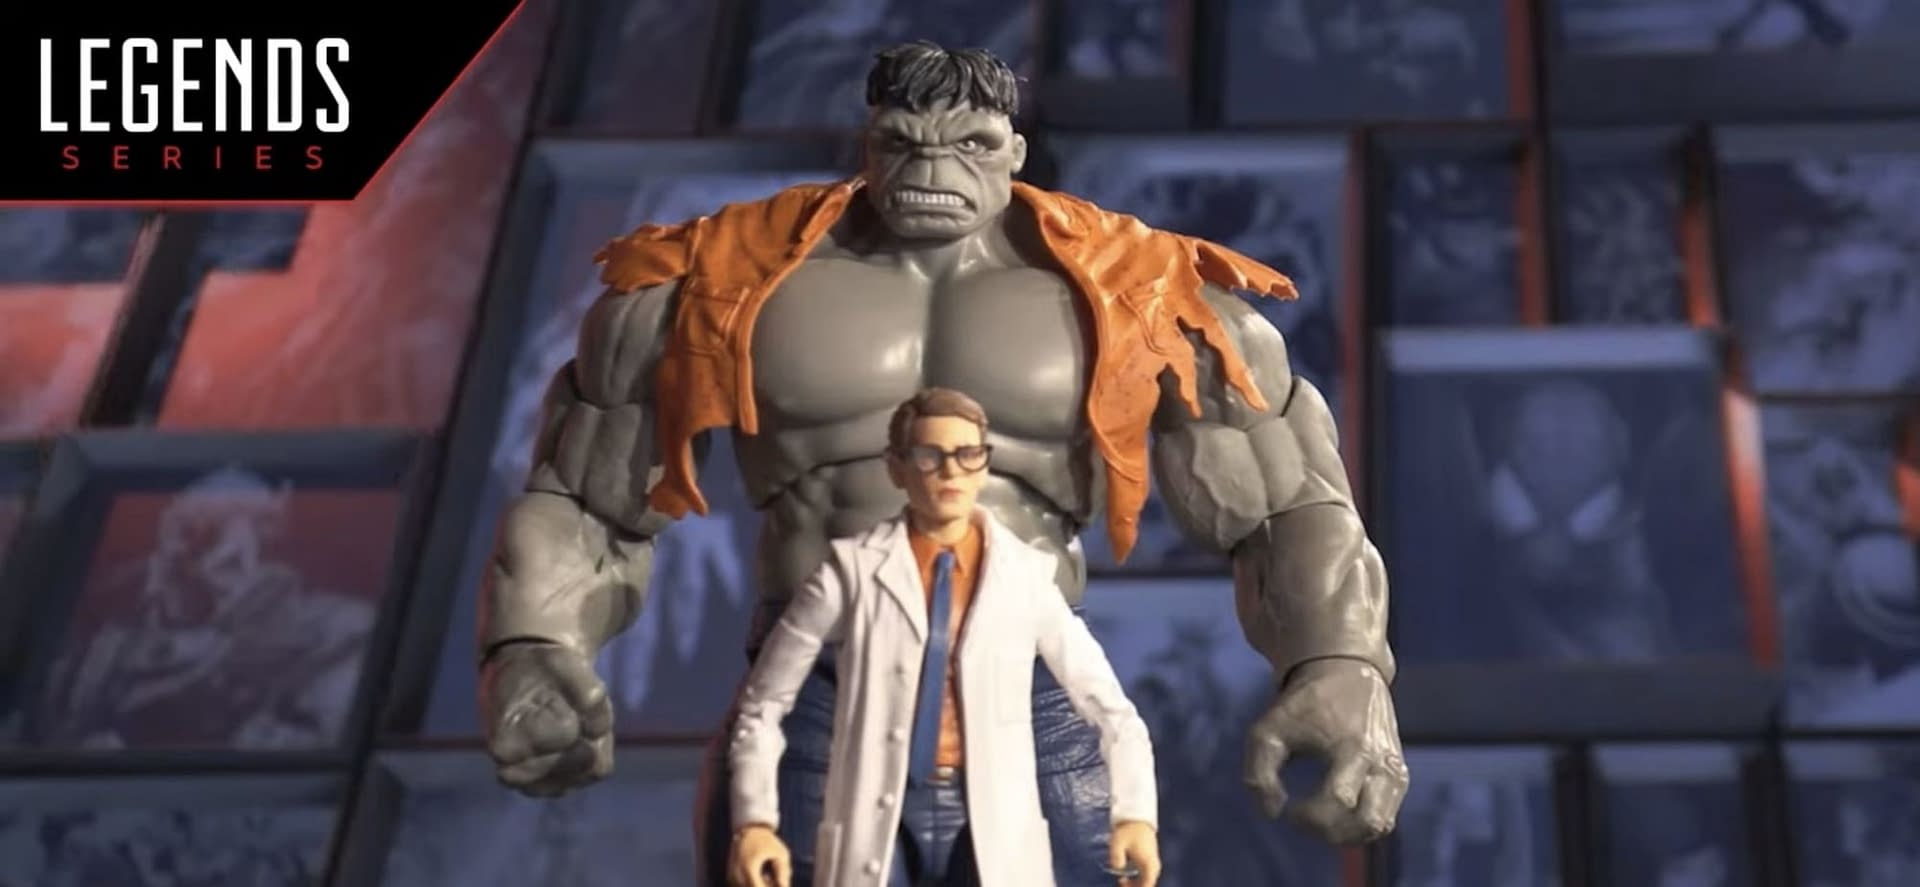 Hasbro Shows Off Some Mighty Hulk and Thor Marvel Legends Sets 